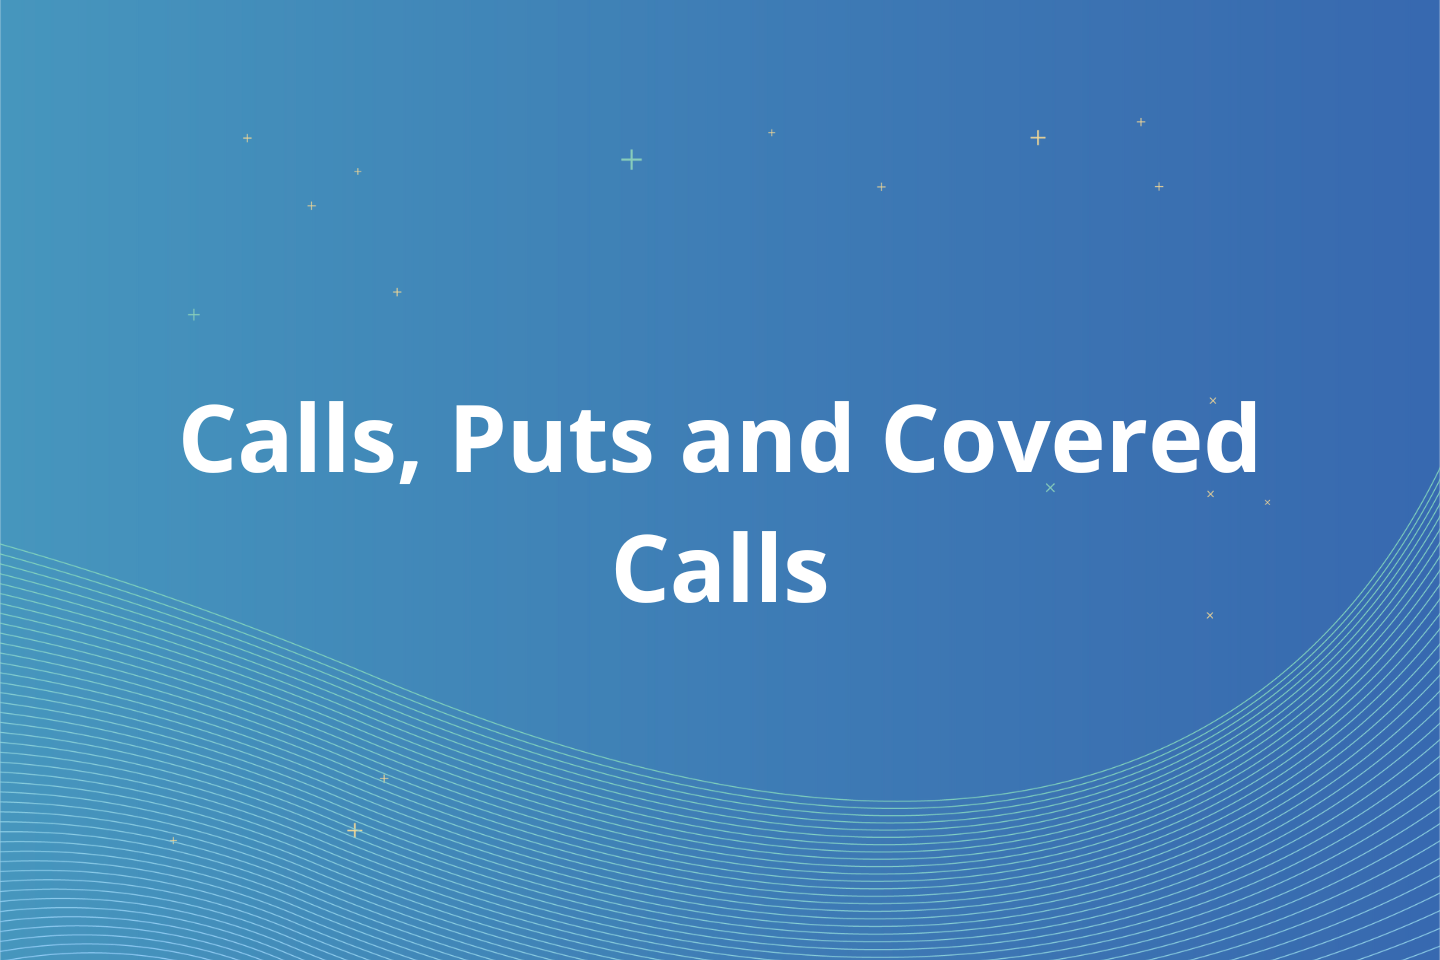 What Are Options? Calls, Puts, and Covered Calls